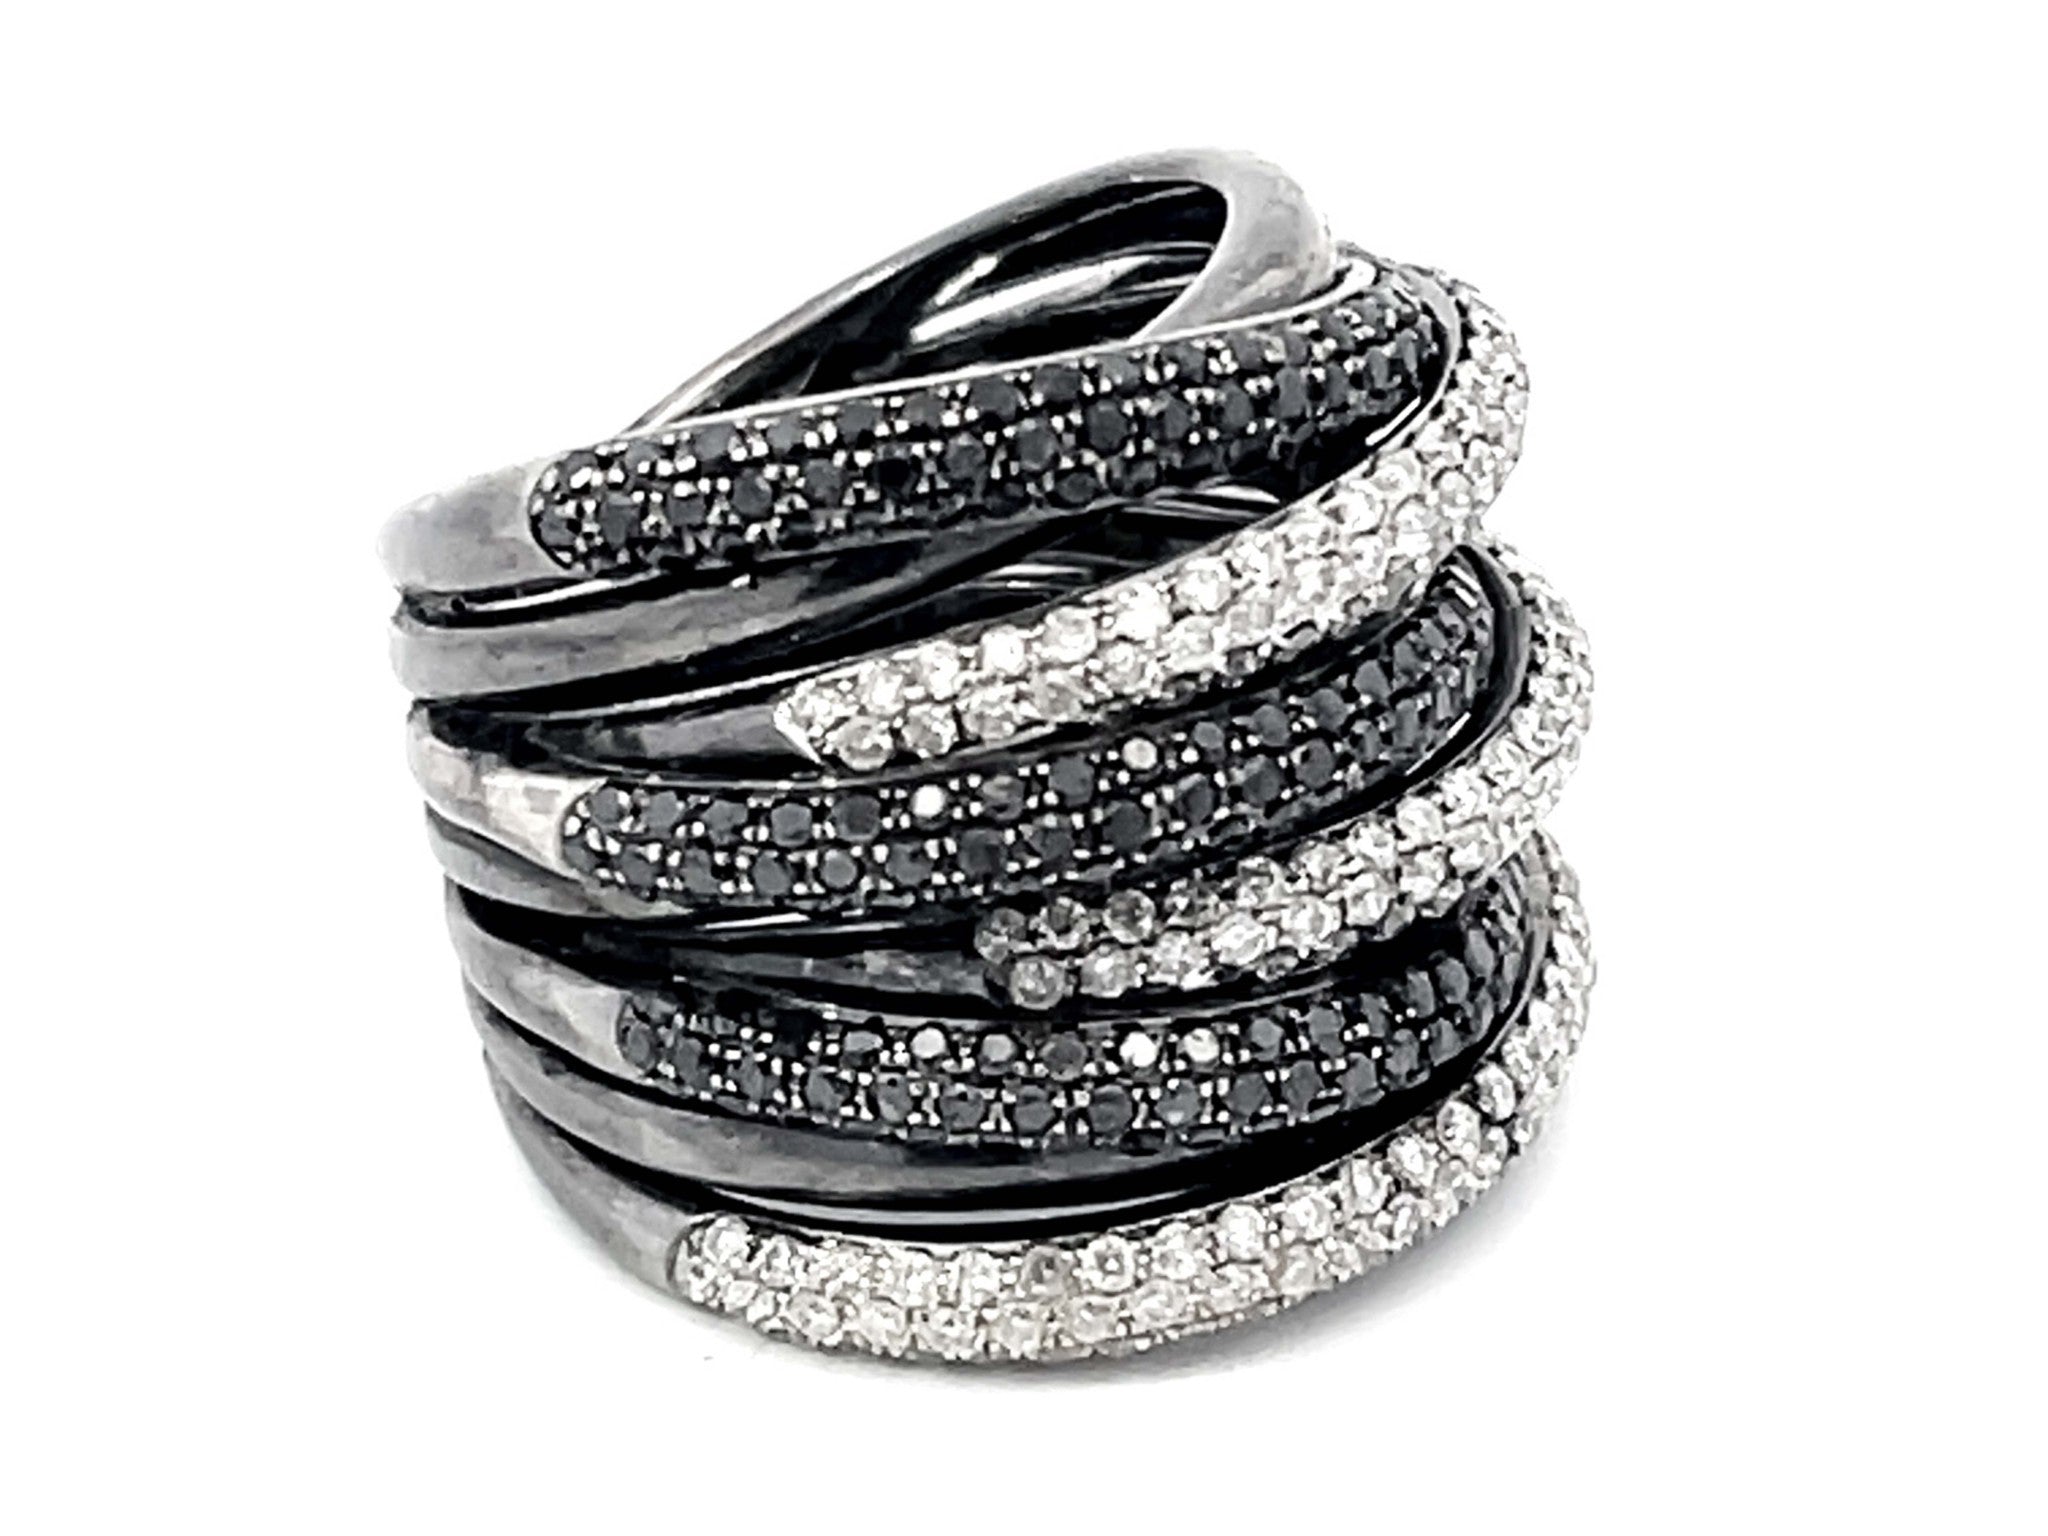 Wide Multi Row Diamond Band Ring in 14k Black Gold